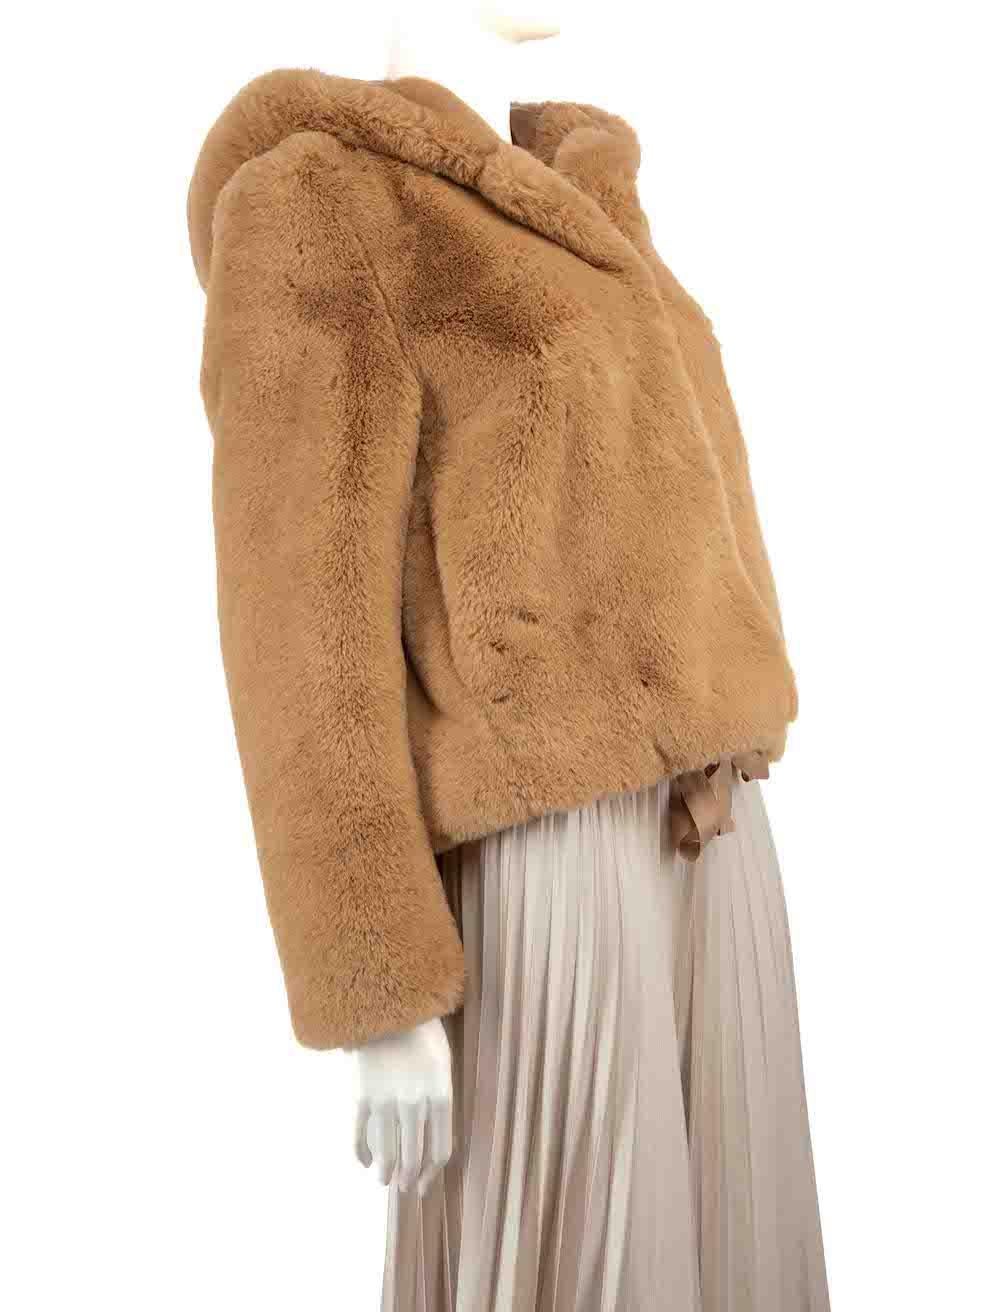 CONDITION is Very good. Hardly any visible wear to jacket is evident on this used Sandro designer resale item.
 
 
 
 Details
 
 
 Camel
 
 Faux fur
 
 Coat
 
 Hooded
 
 Cropped fit
 
 Hook fastening
 
 2x Side pockets
 
 
 
 
 
 Made in China
 
 
